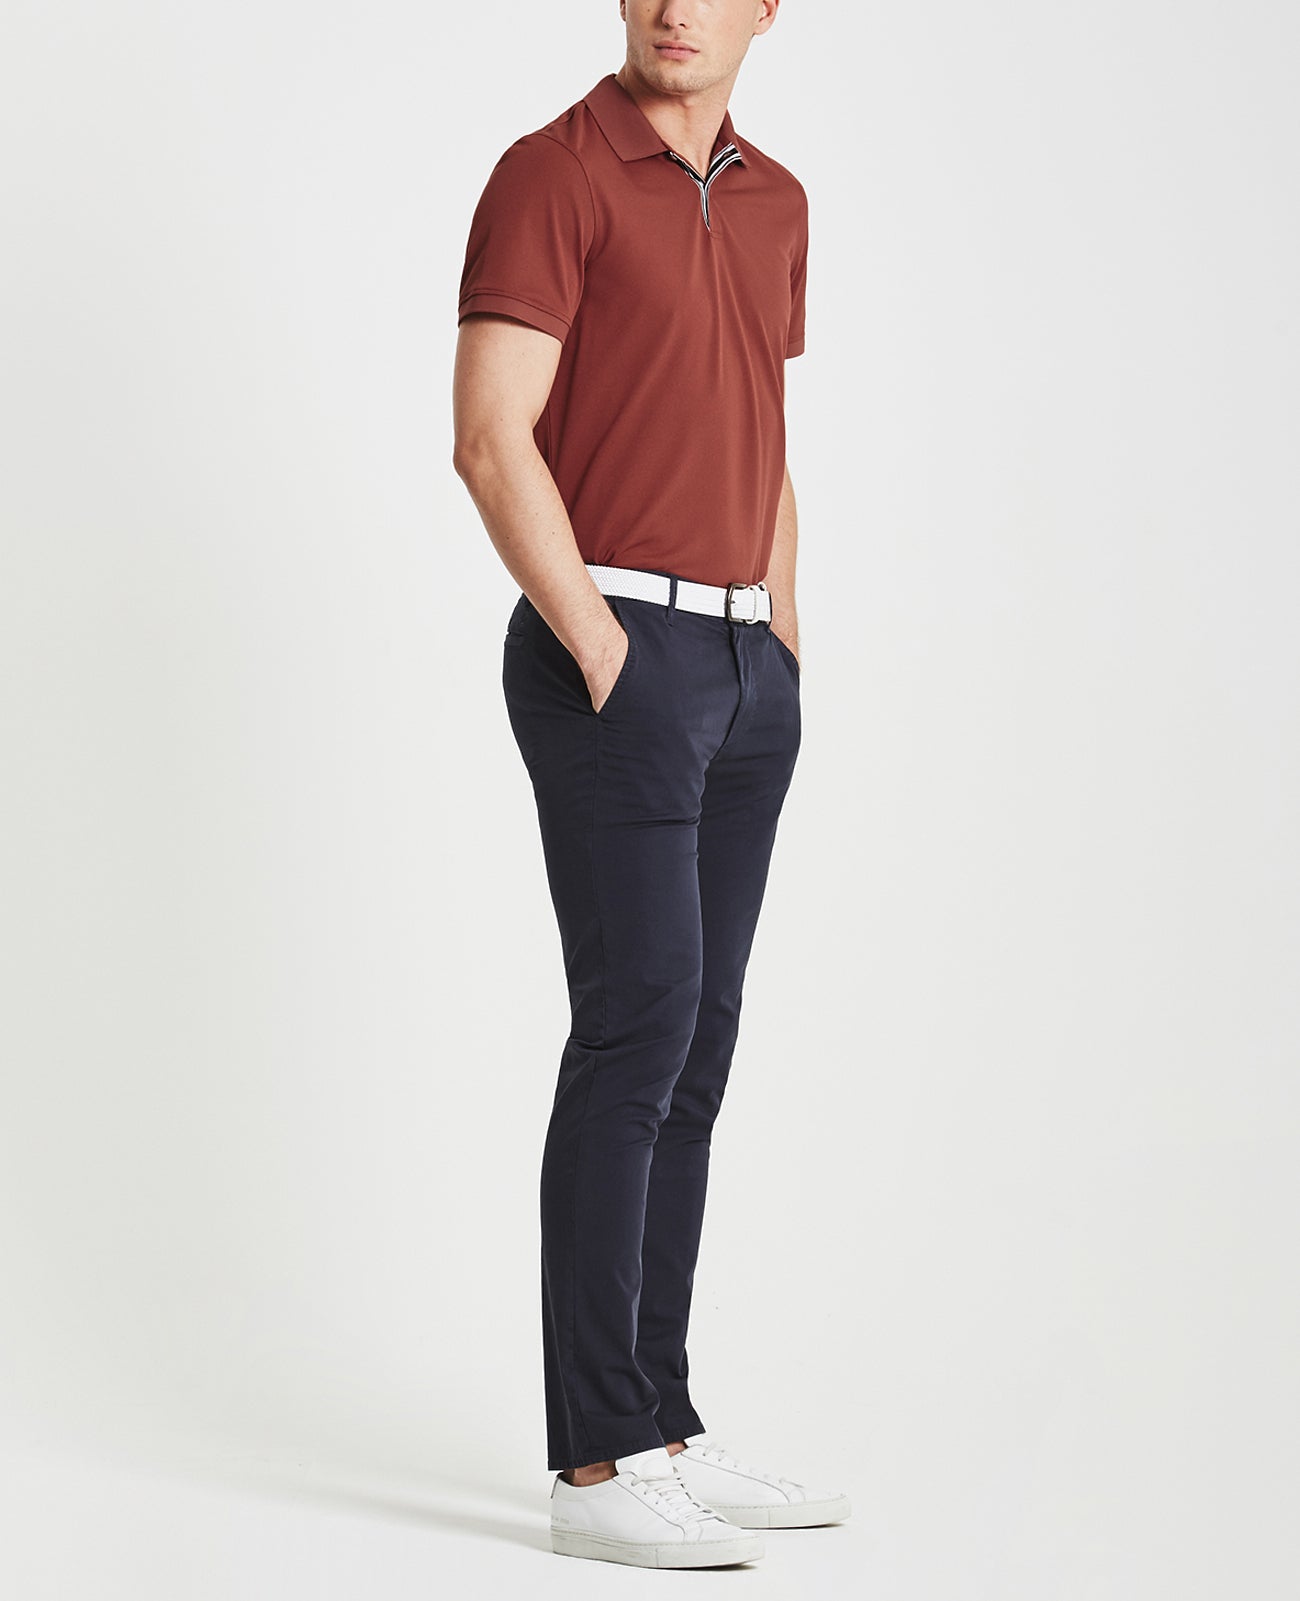 Berrian Polo Barn Red Green Label Collection Men Tops Photo 2